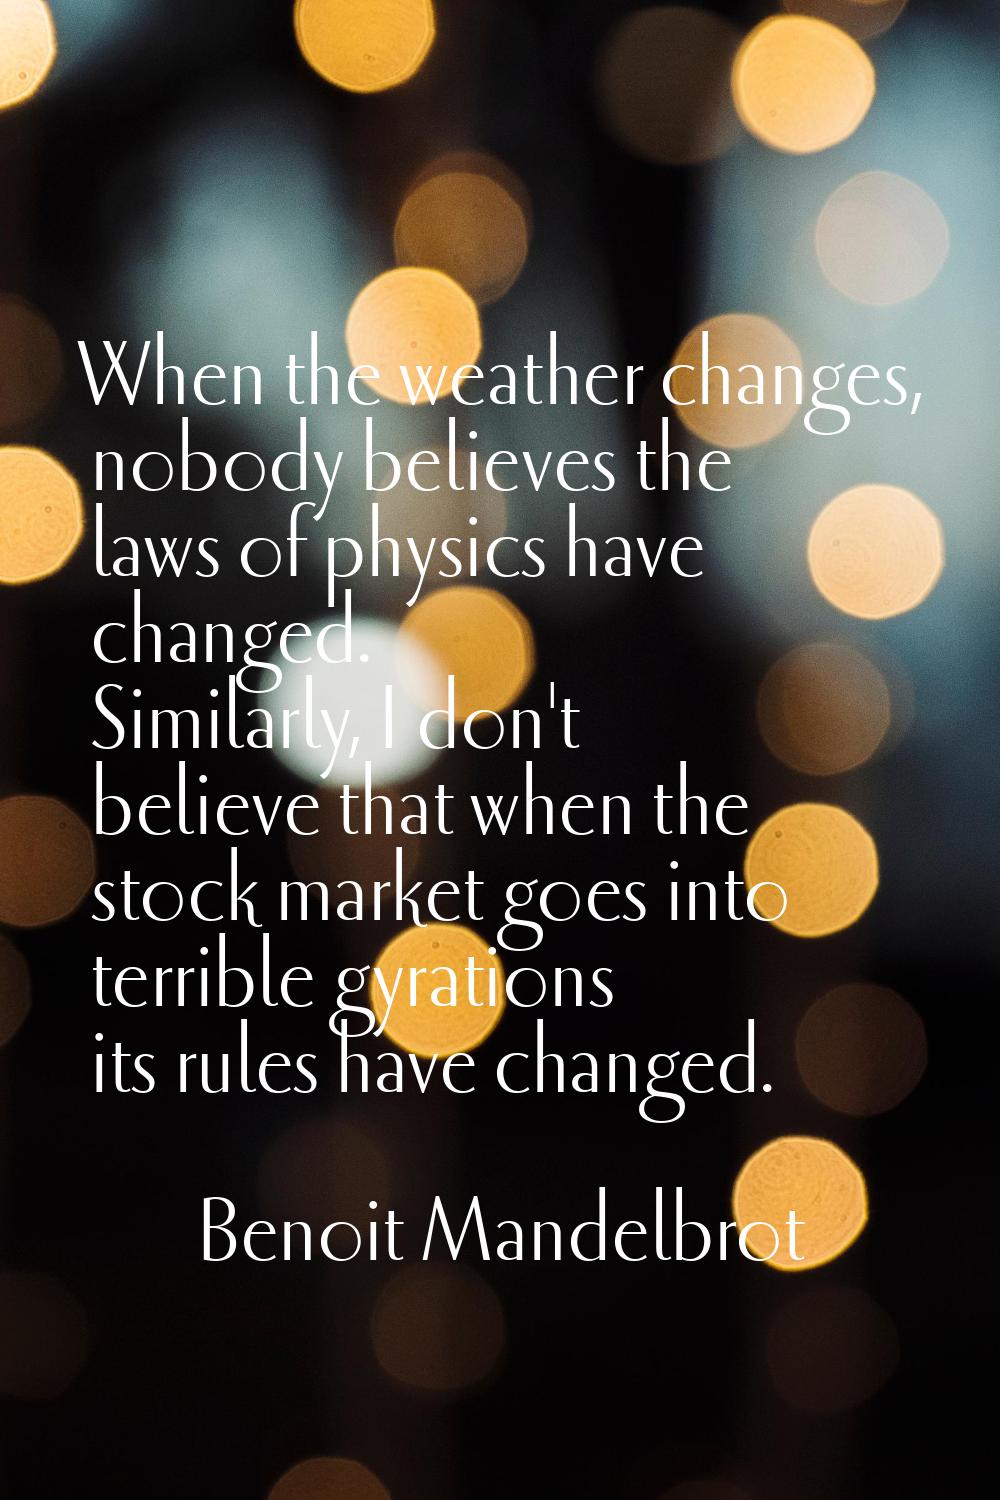 When the weather changes, nobody believes the laws of physics have changed. Similarly, I don't beli